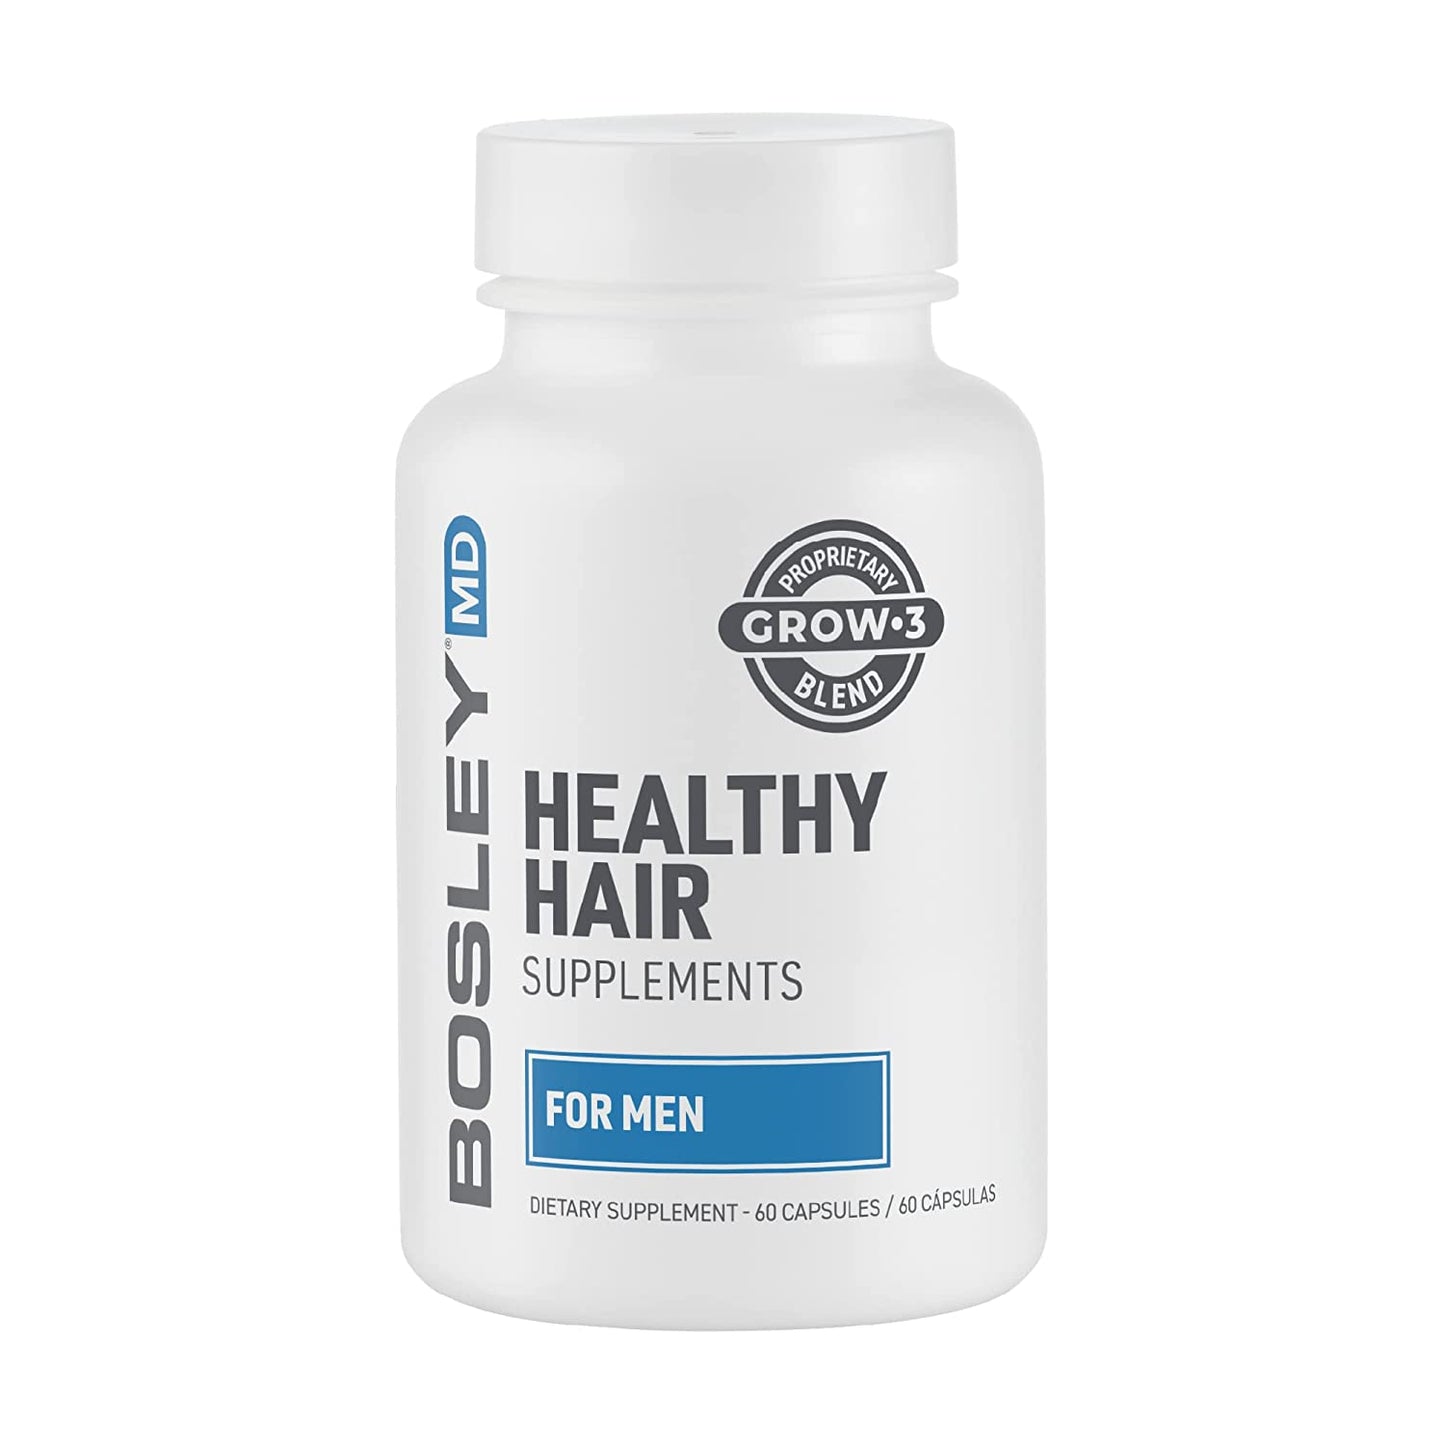 Bosley Healthy Hair Growth Supplement for Men - 60 Count